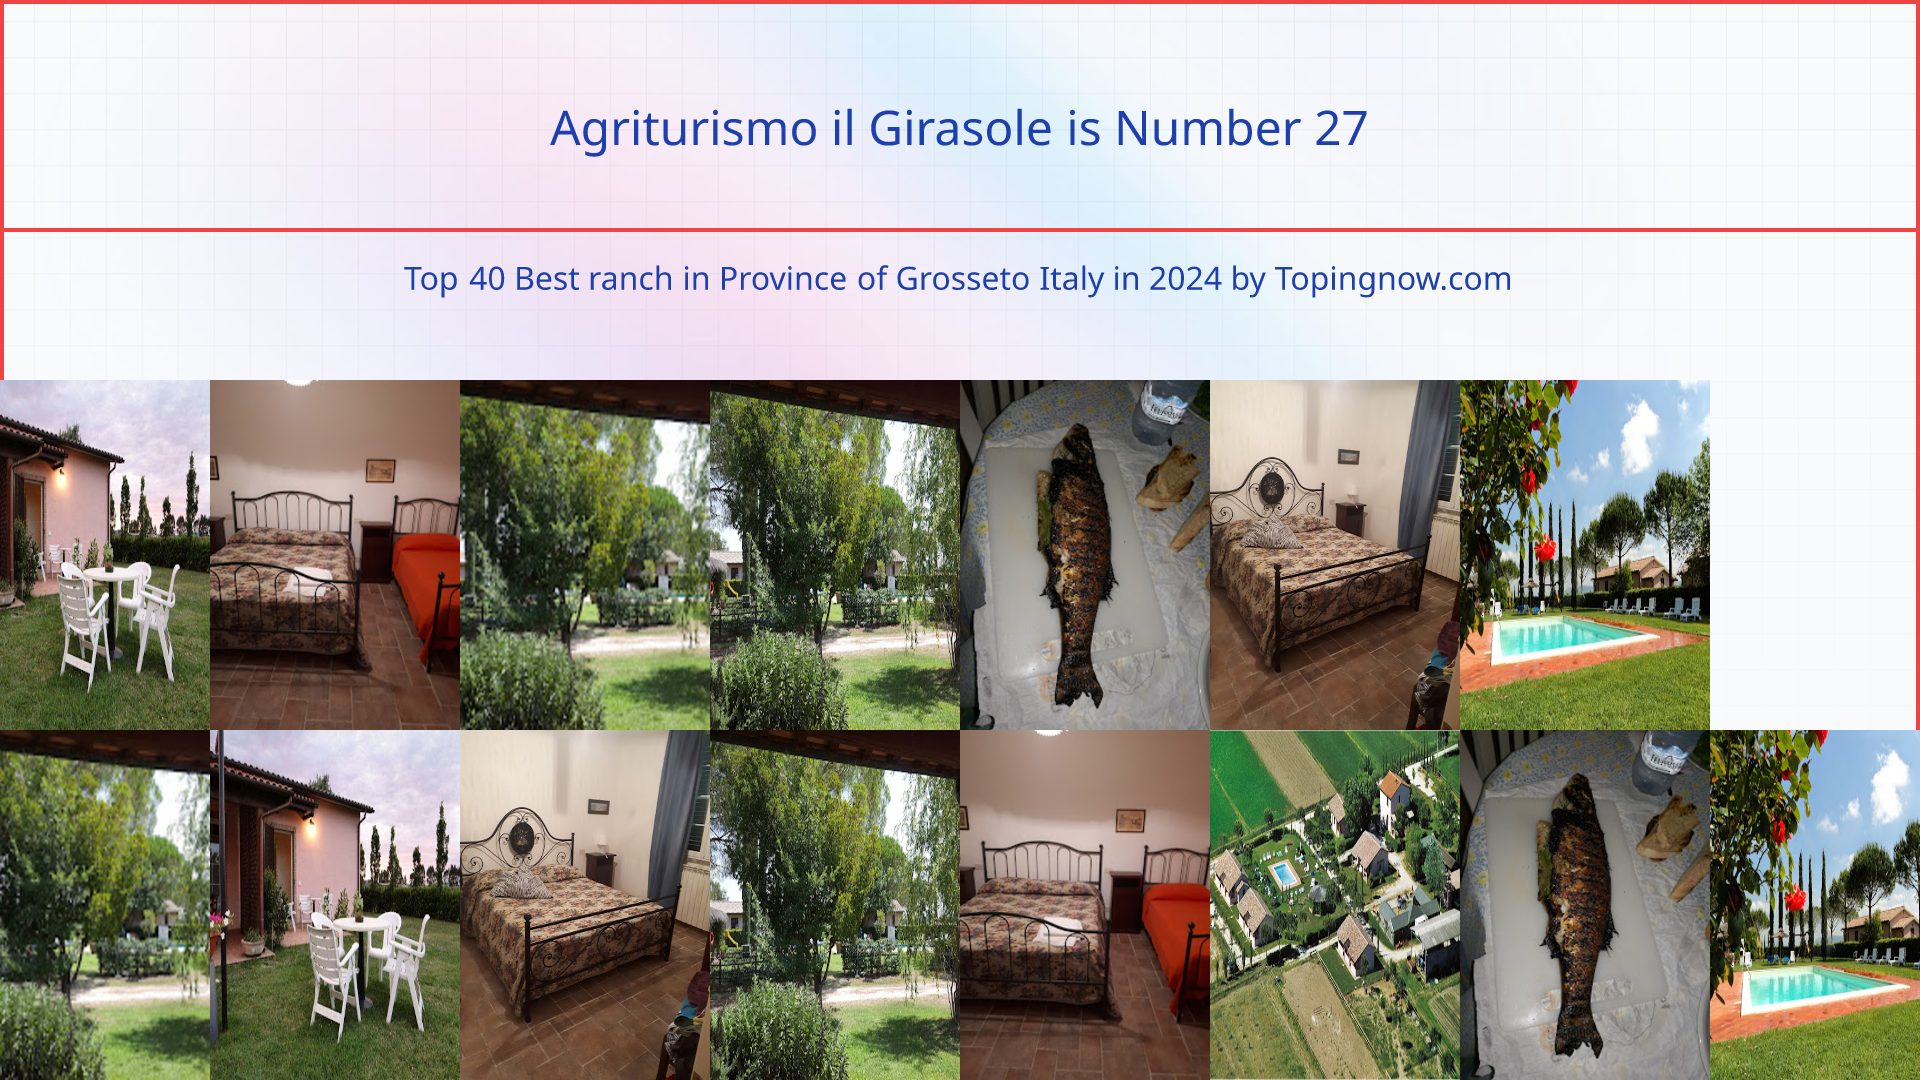 Agriturismo il Girasole: Top 40 Best ranch in Province of Grosseto Italy in 2024